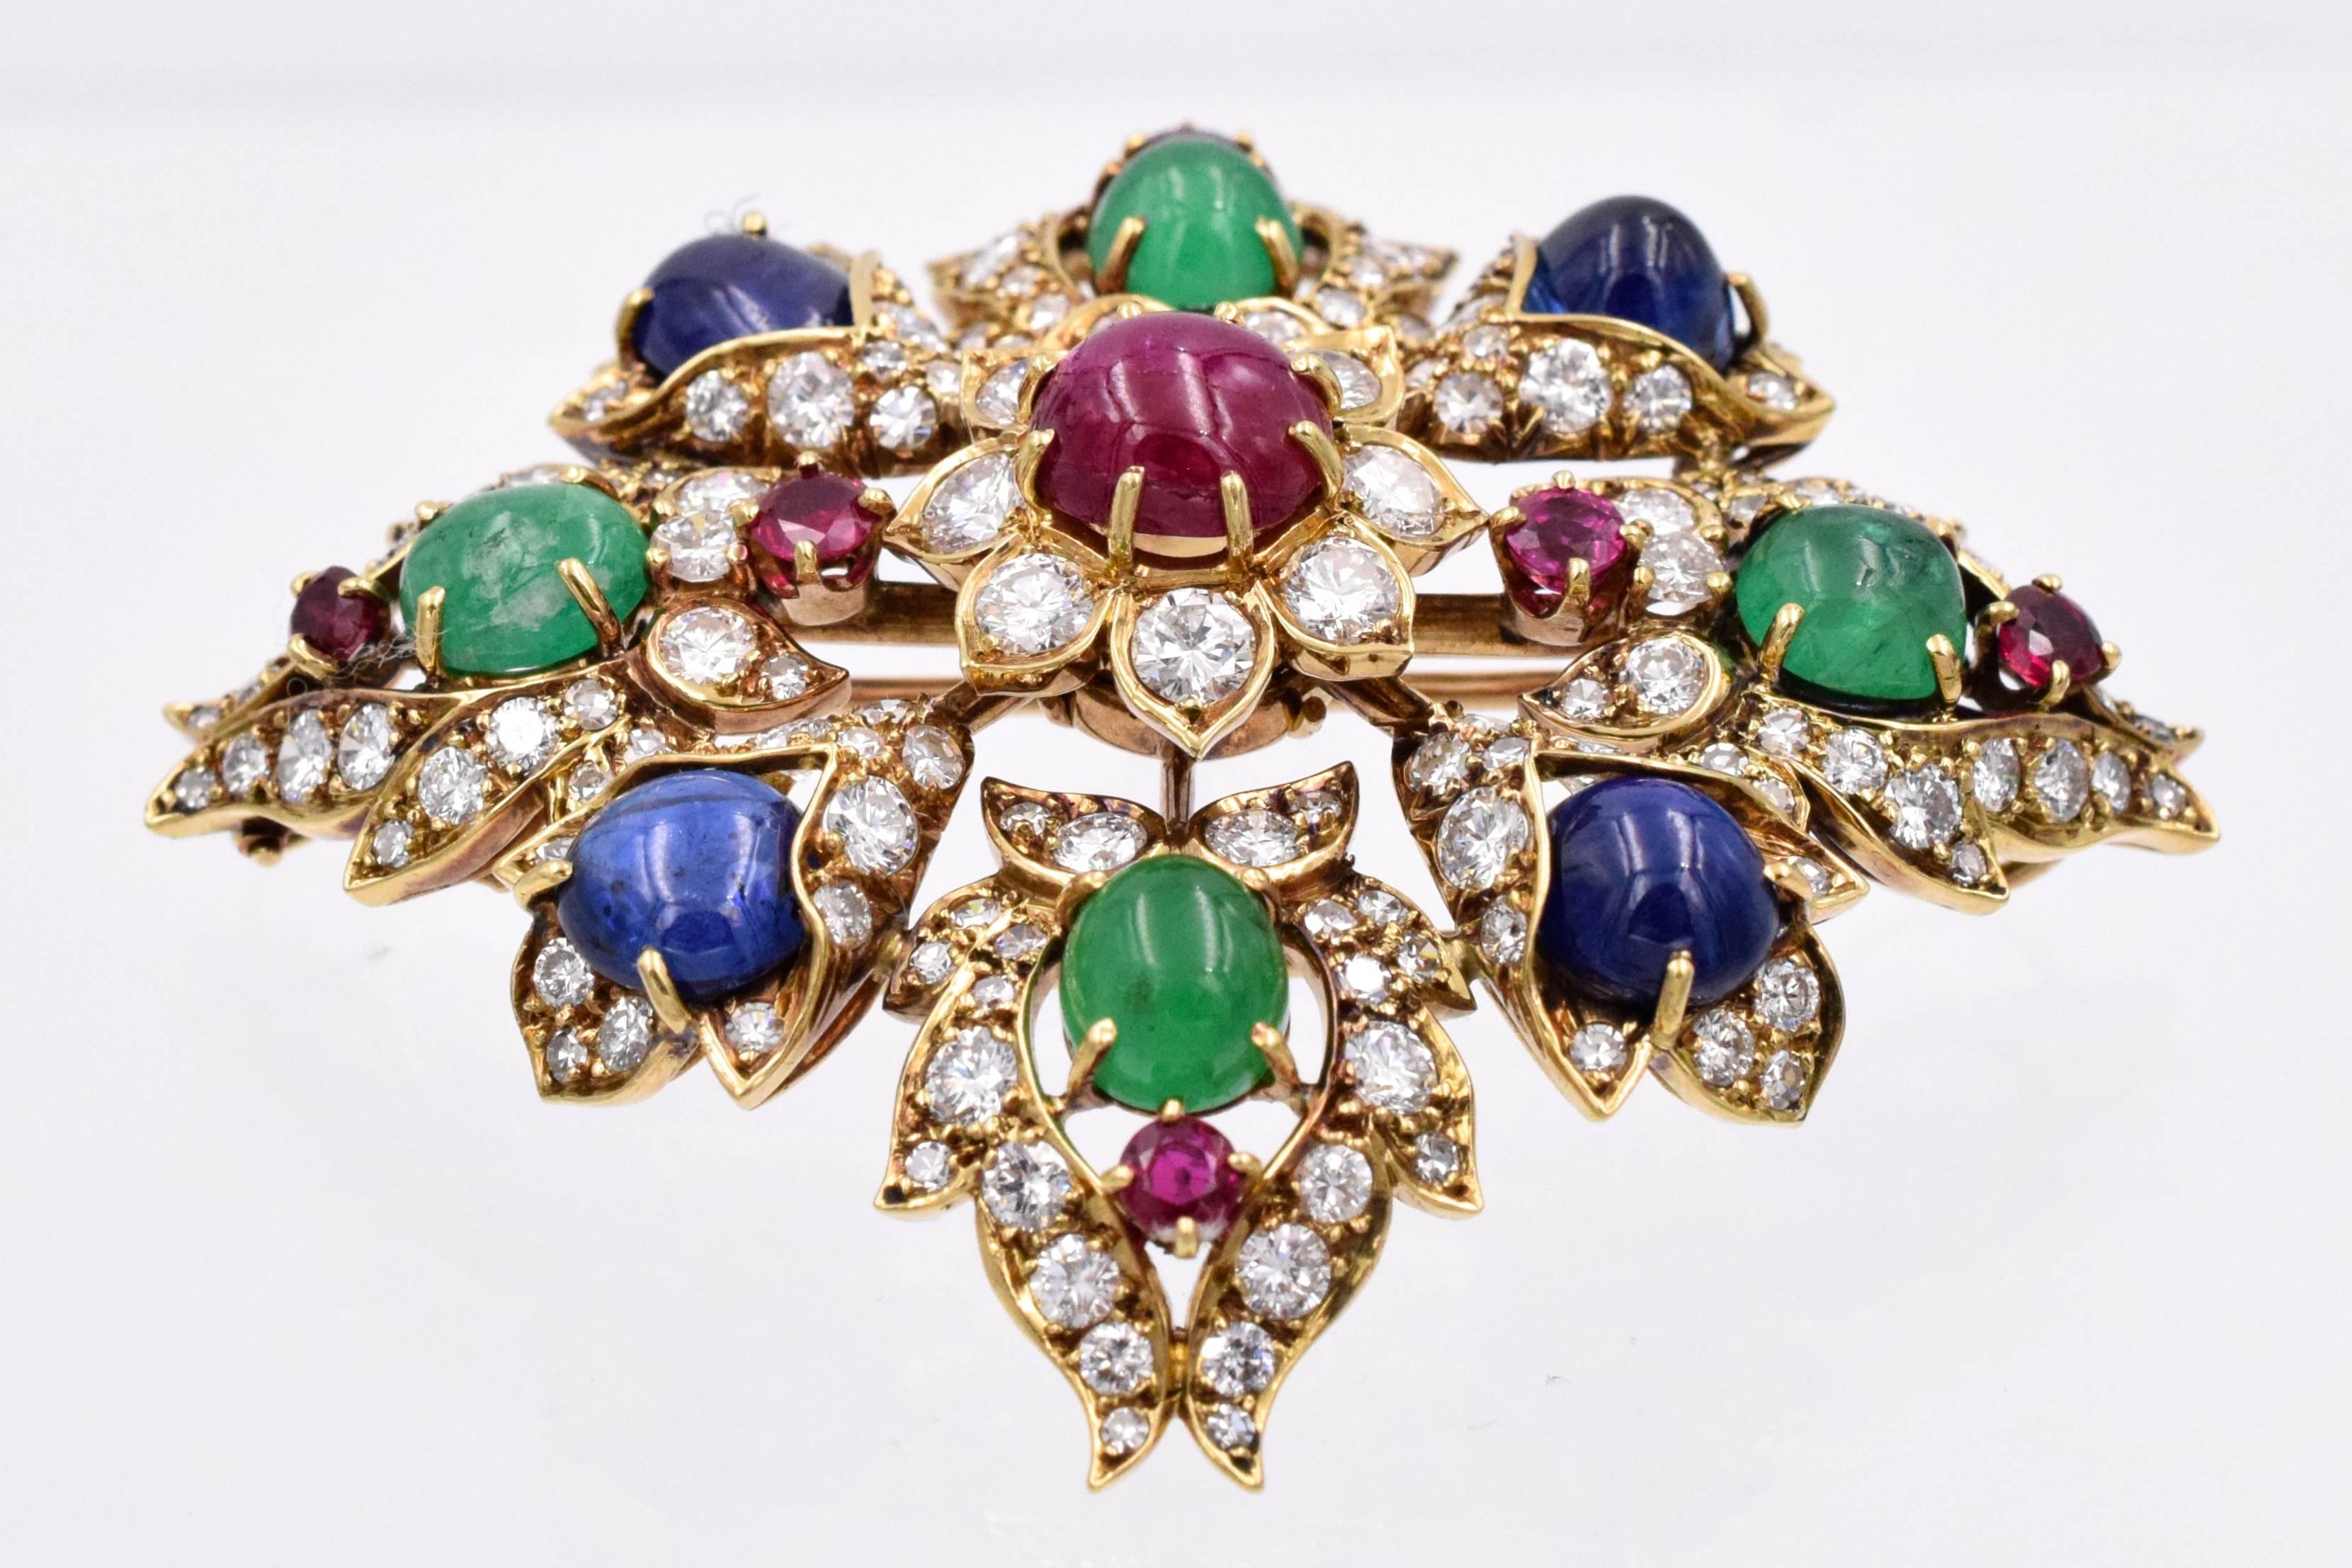 Classic Vintage  Van Cleef & Arpels Diamond, ruby, sapphire & emerald brooch/pendant. Spectacular colorful brooch with 3.32 carats of diamonds, rubies are 4.5 carats, sapphires are 7.5 carats & emeralds are 4 carats.
18k gold Makers' signature VCA &